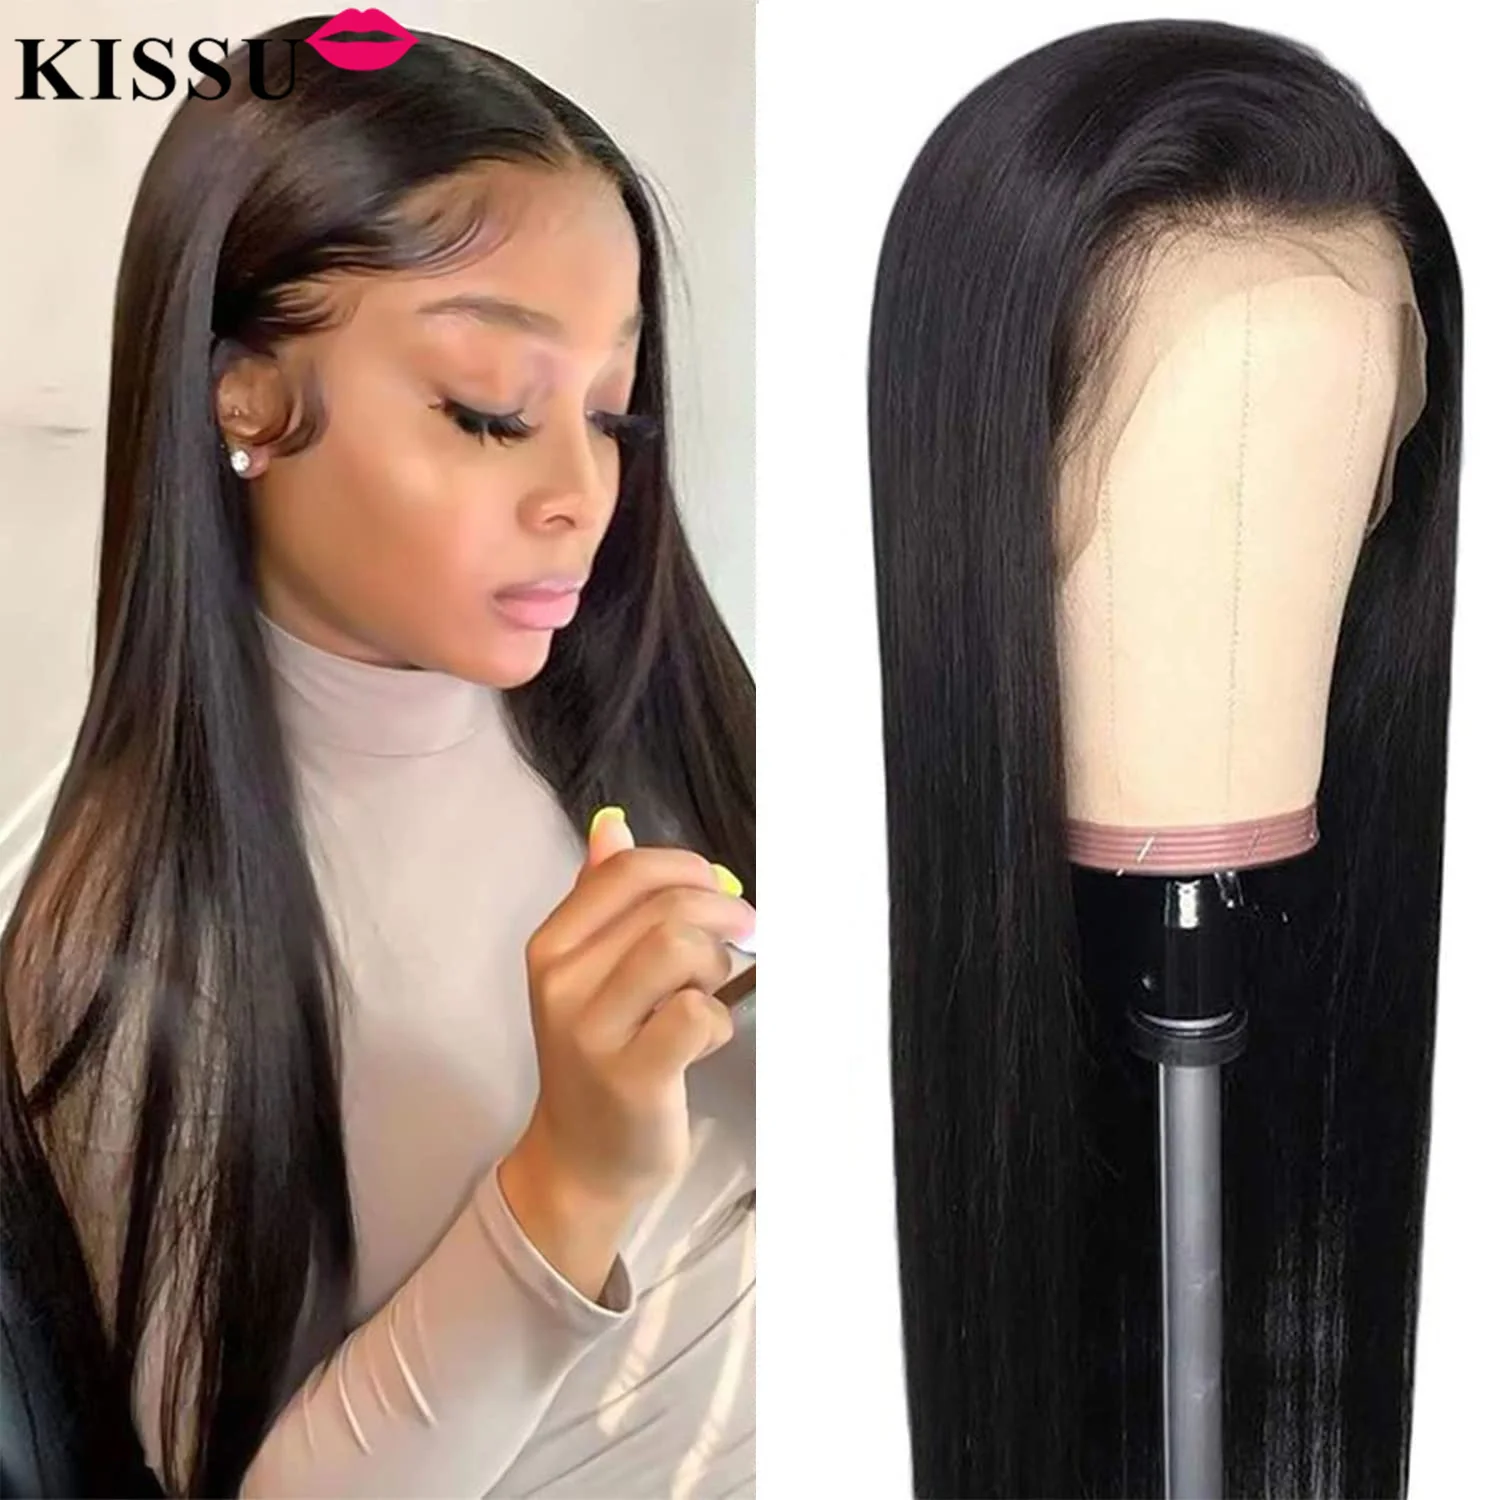 KISSU Lace Closure Wig Bone Straight Lace Front Wig 13x4 Lace Frontal Human Hair Wigs For Black Women 4x4 Closure Wig